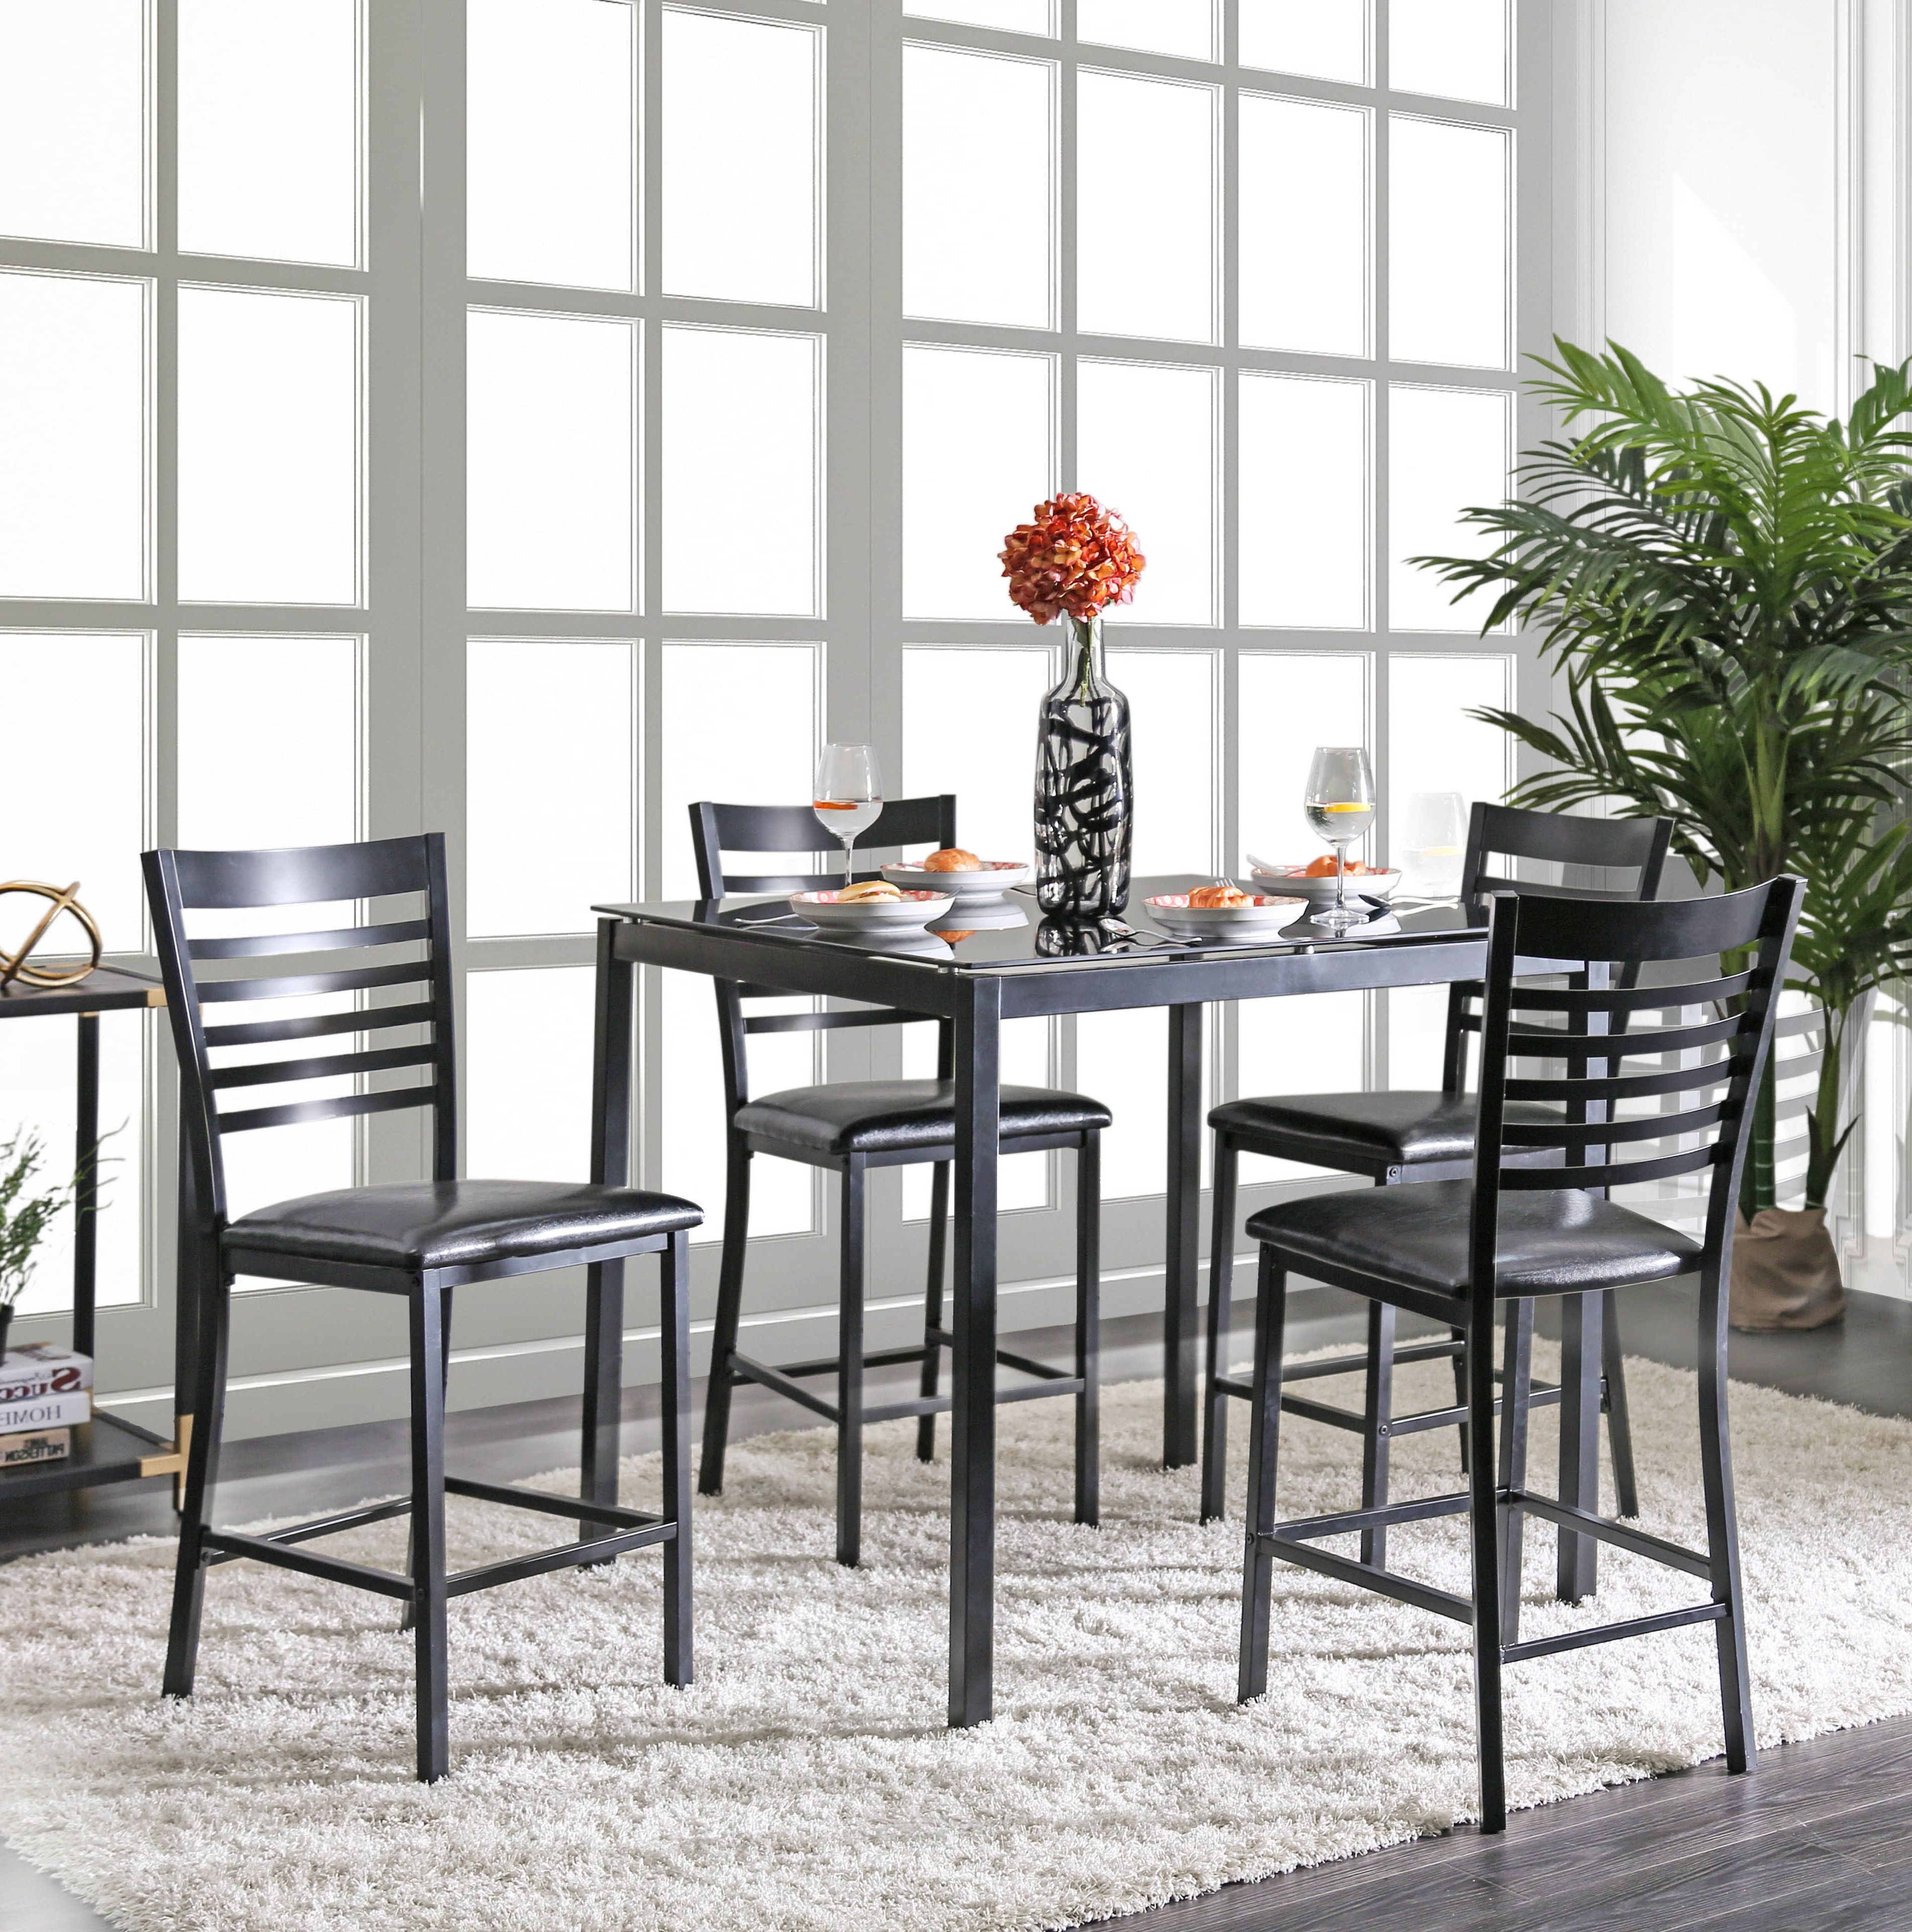 Taulbee 5 Piece Dining Sets Regarding Widely Used Bhamidipati Pub 5 Piece Dining Set (View 15 of 20)